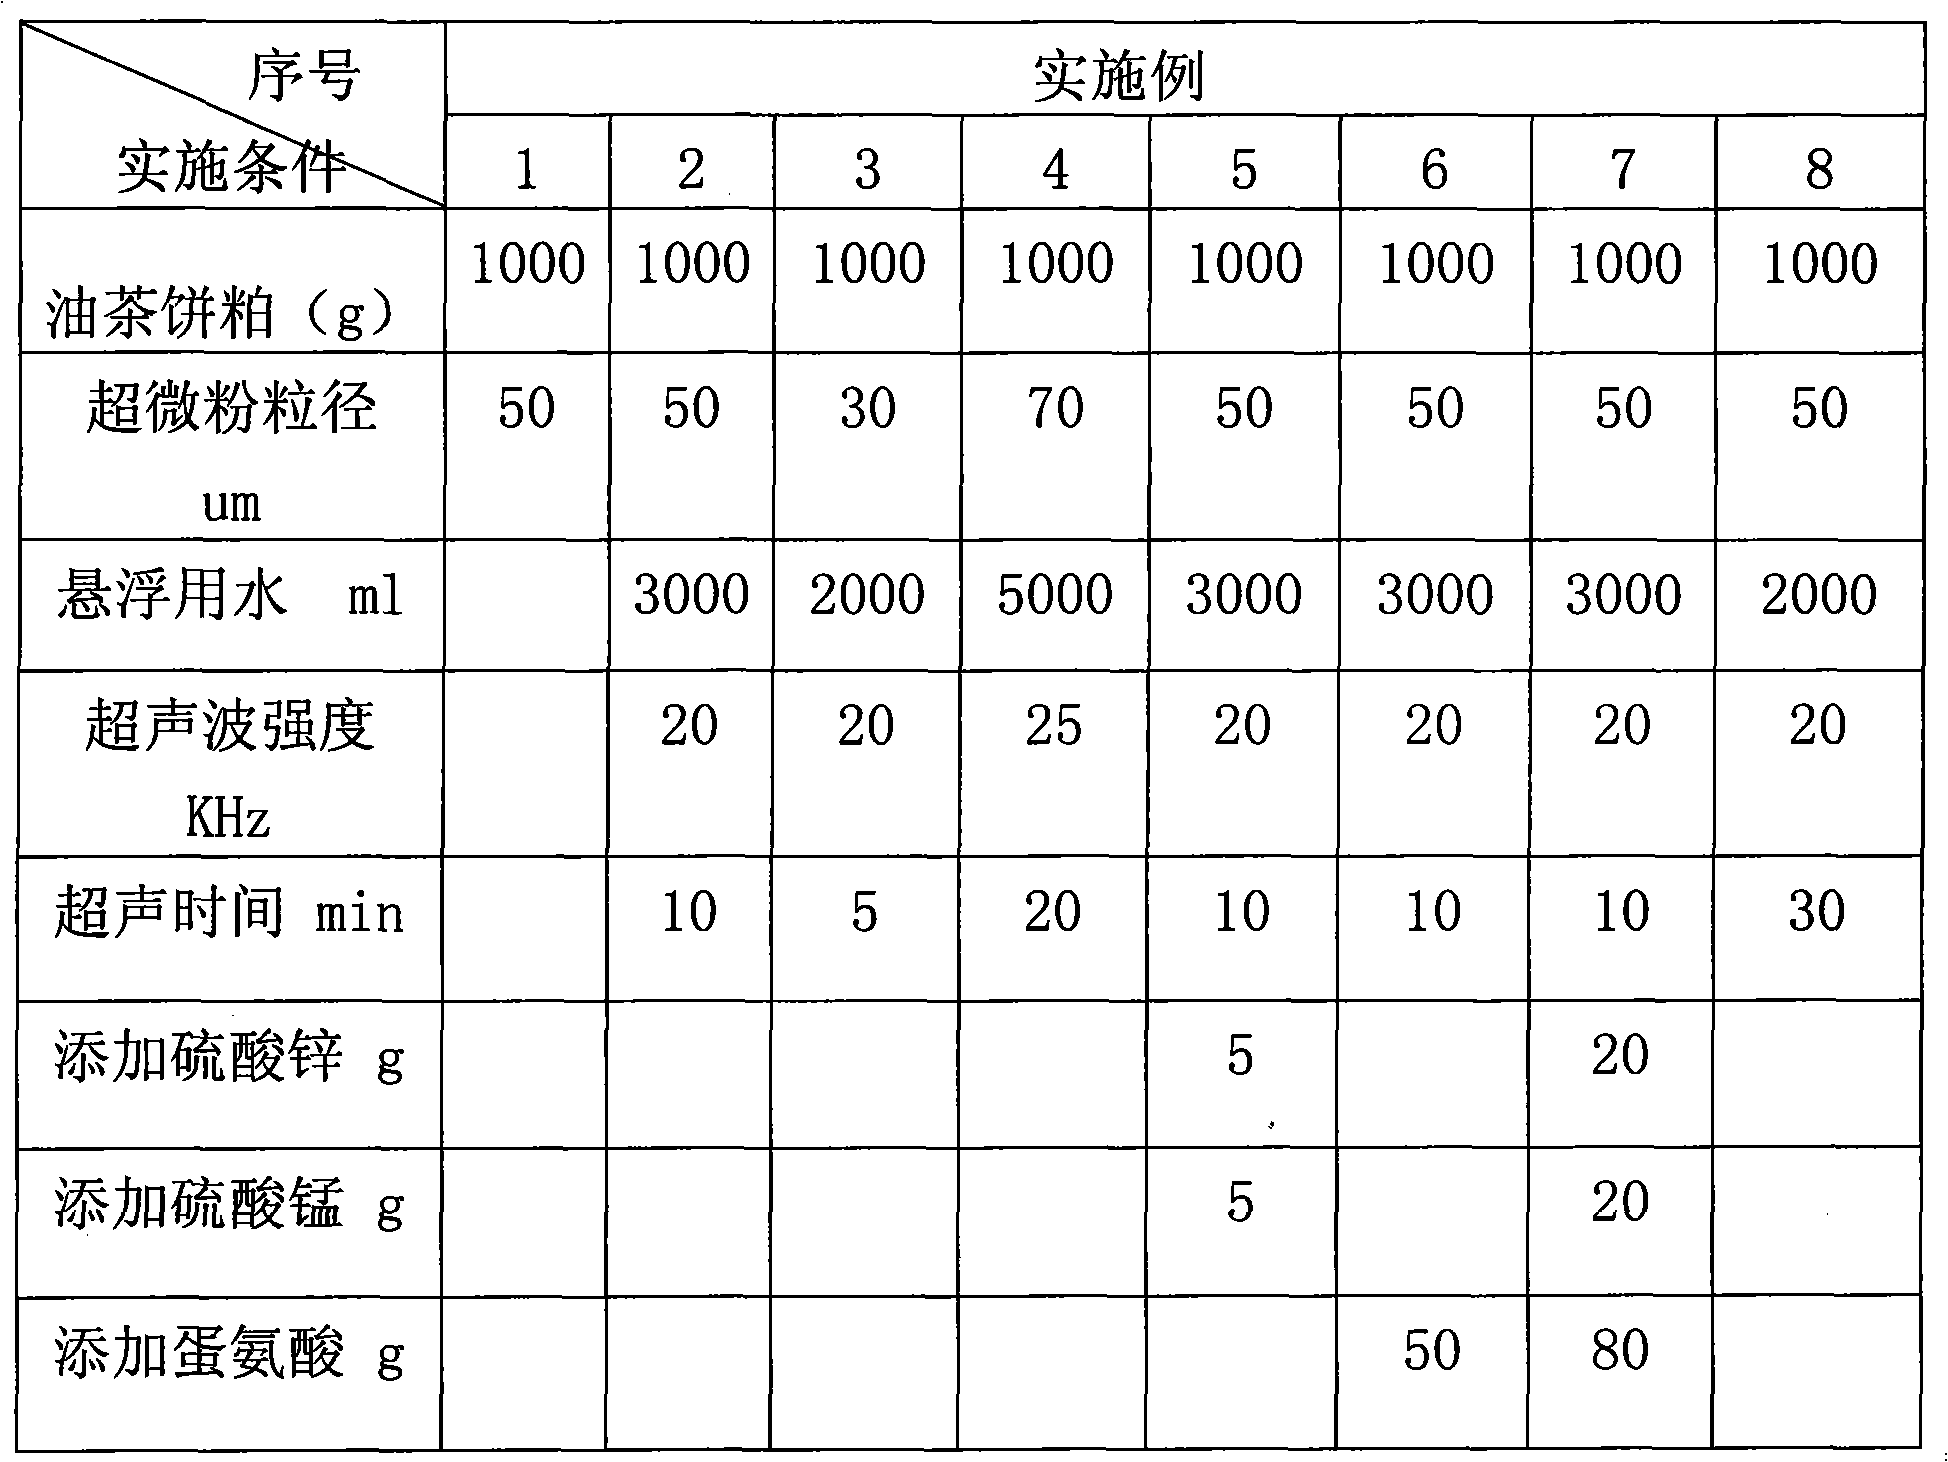 Method for producing multi-effect oil-tea-cake meal feed additive